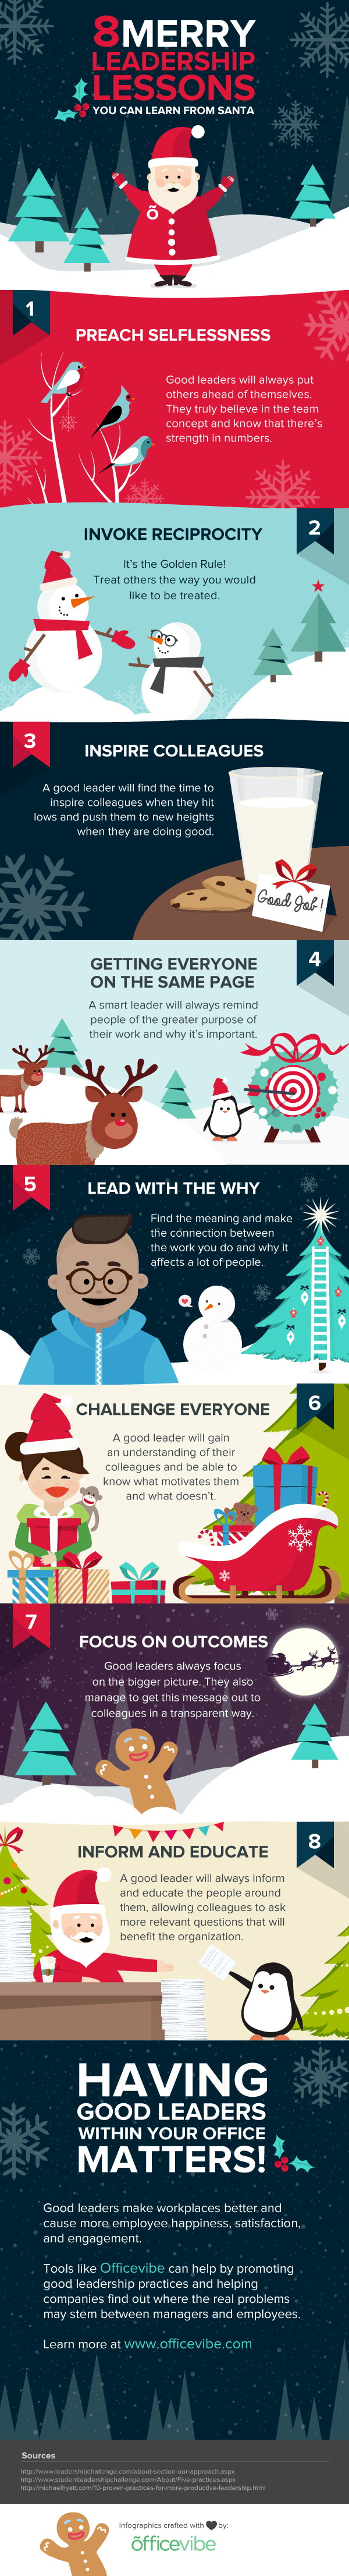 8 Merry Leadership Lessons Taught by Santa Infographic